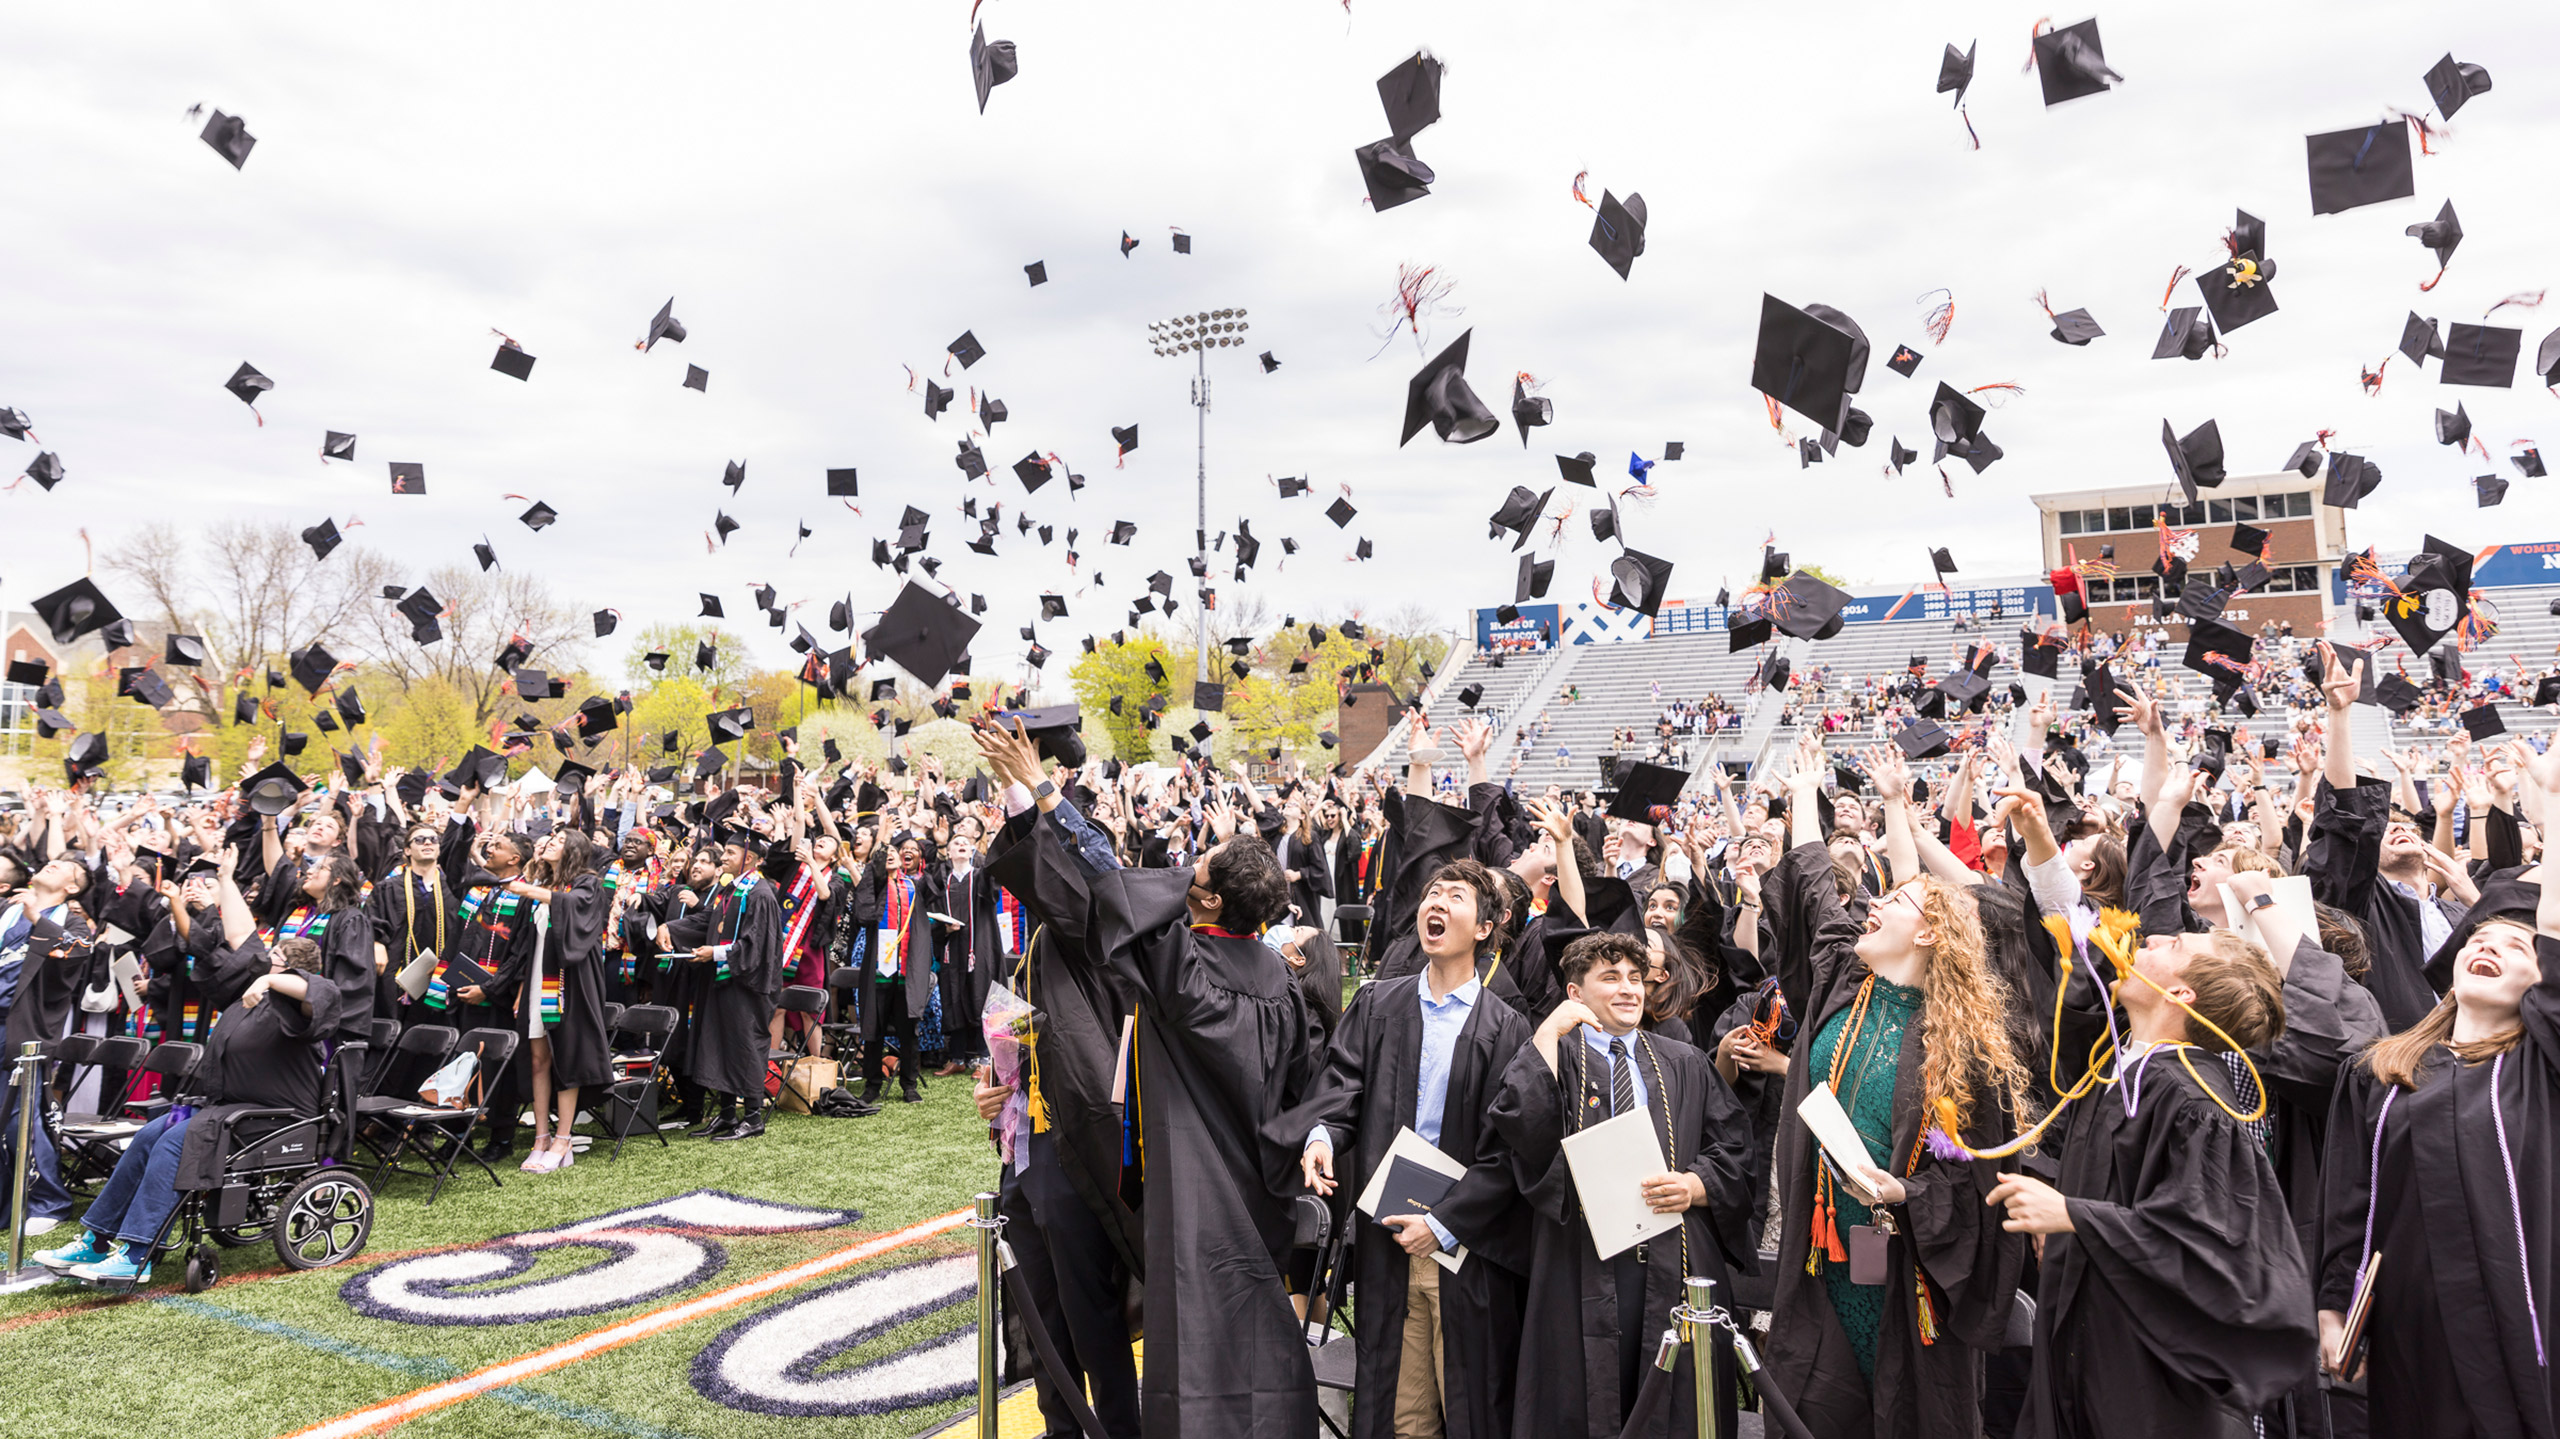 Students throwing their caps at the Commencement ceremony